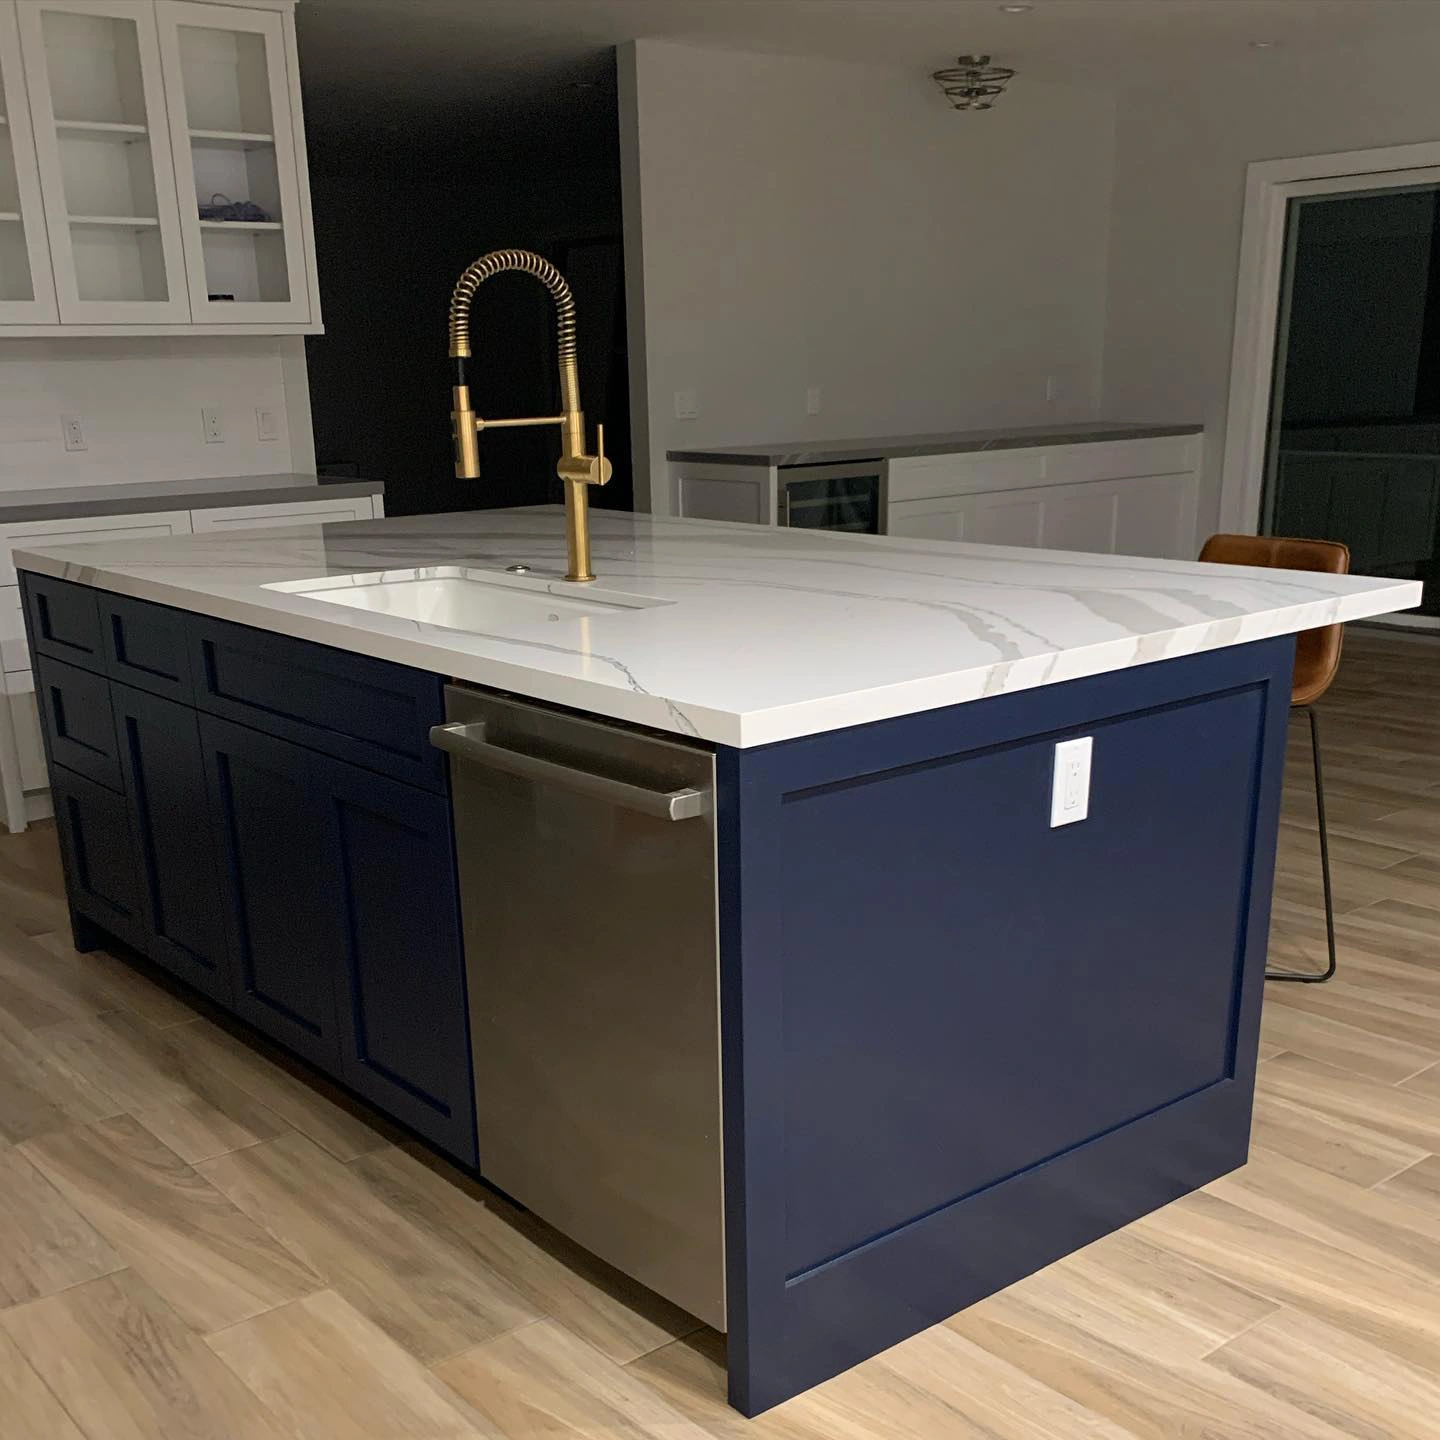 Kitchen island with marble countertop and Sherwin Williams Naval paint